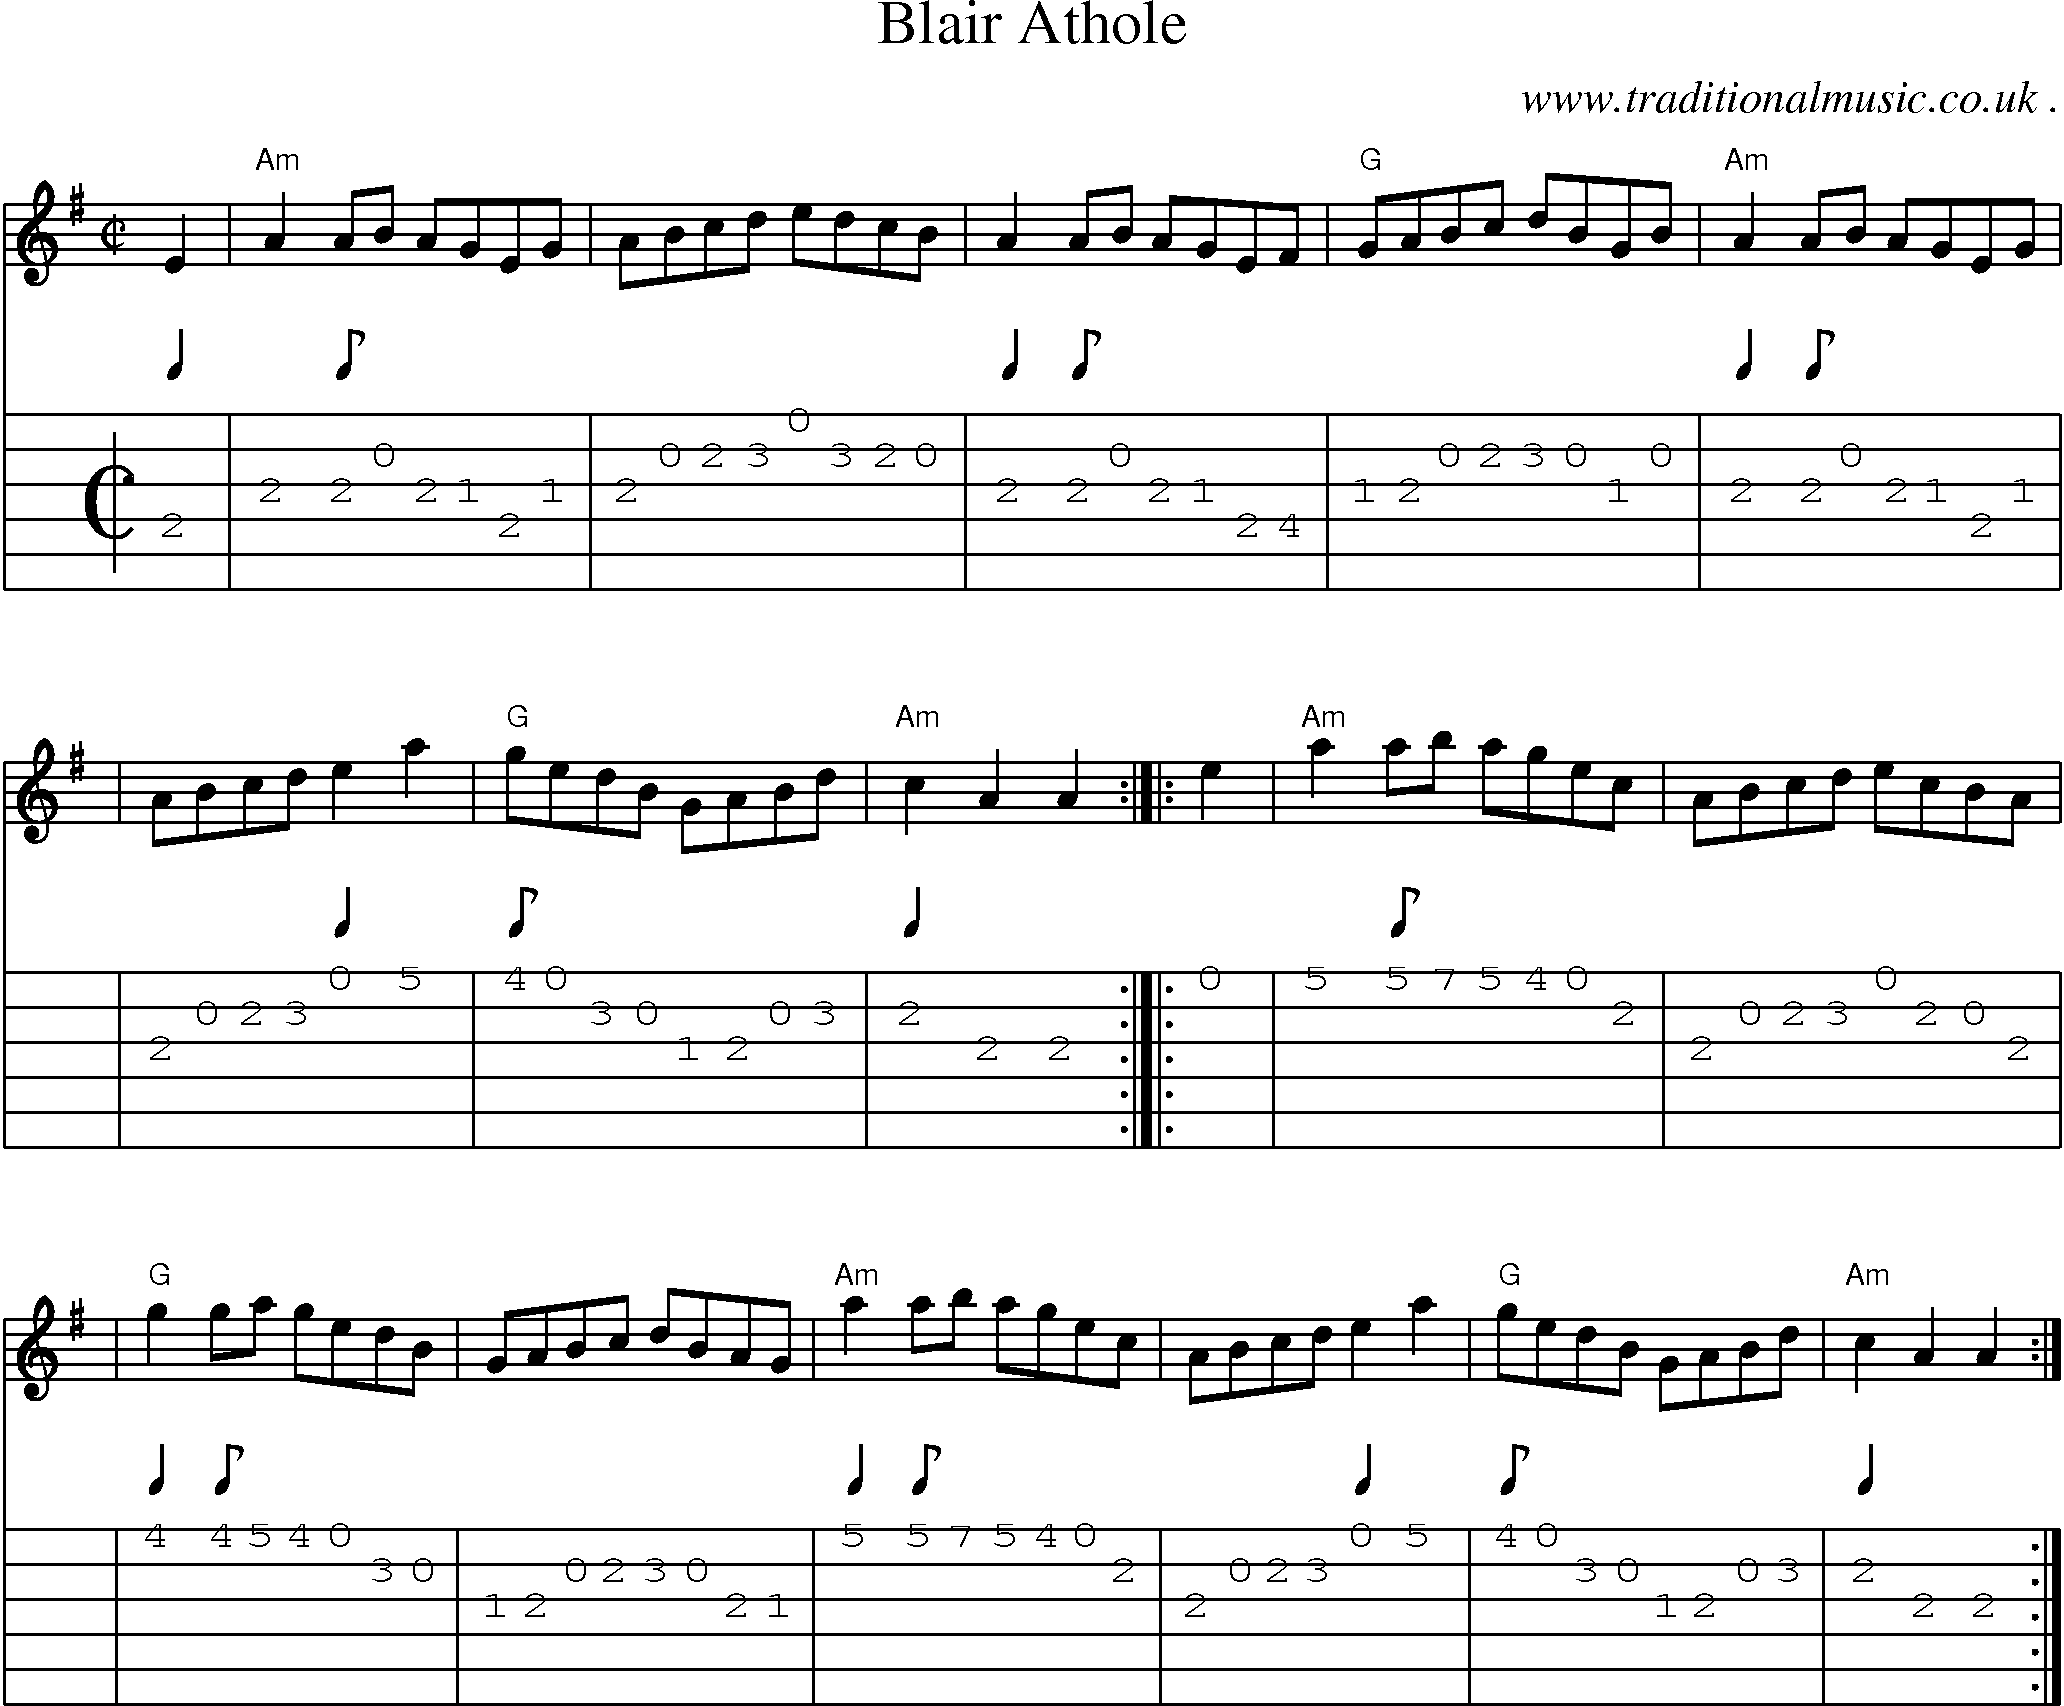 Sheet-music  score, Chords and Guitar Tabs for Blair Athole